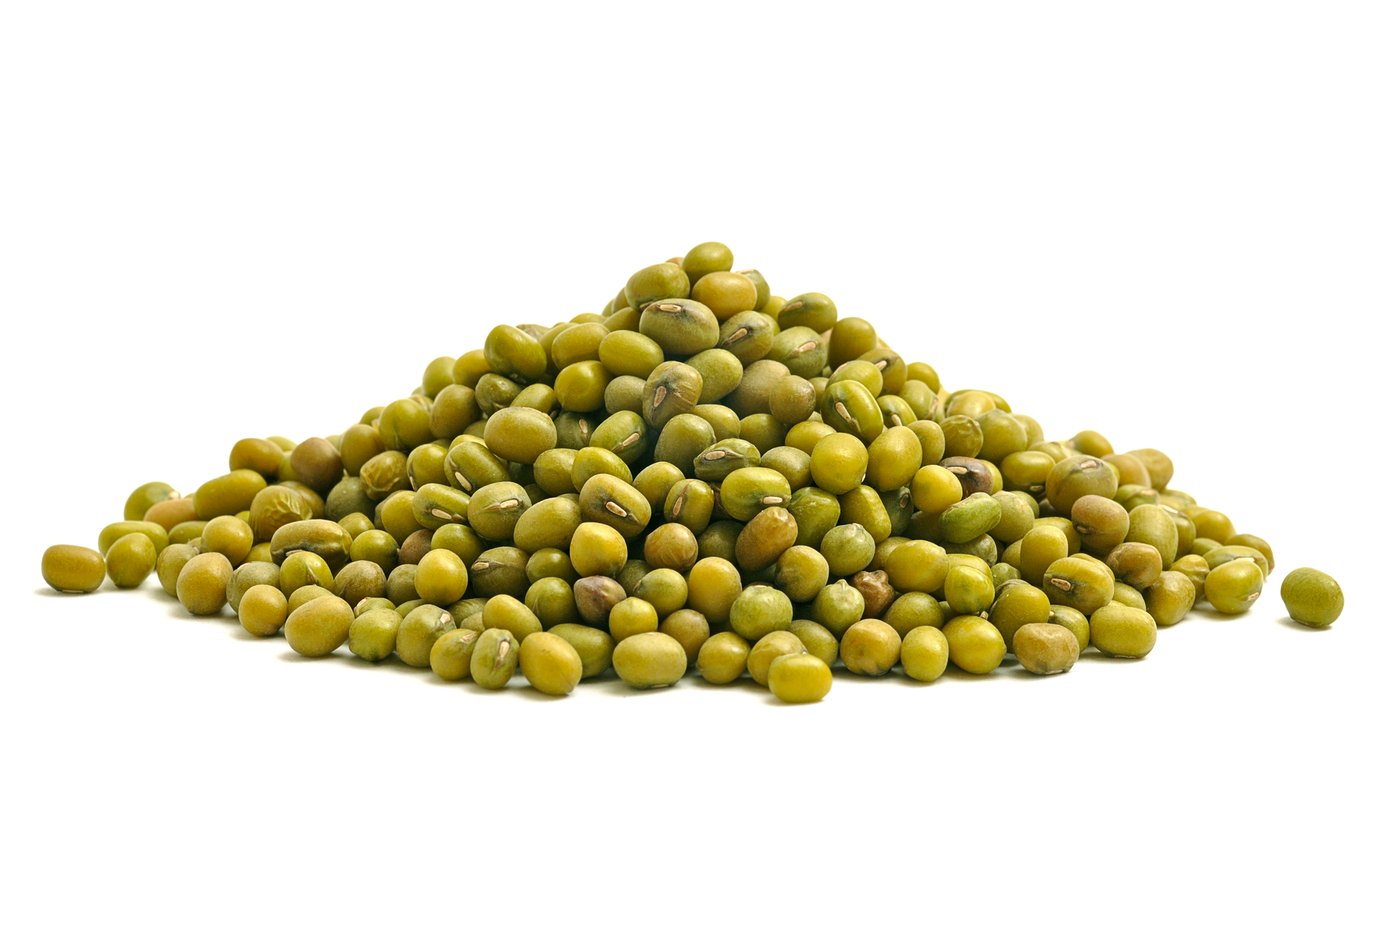 Mung Beans - Cooking & Baking - Nuts.com